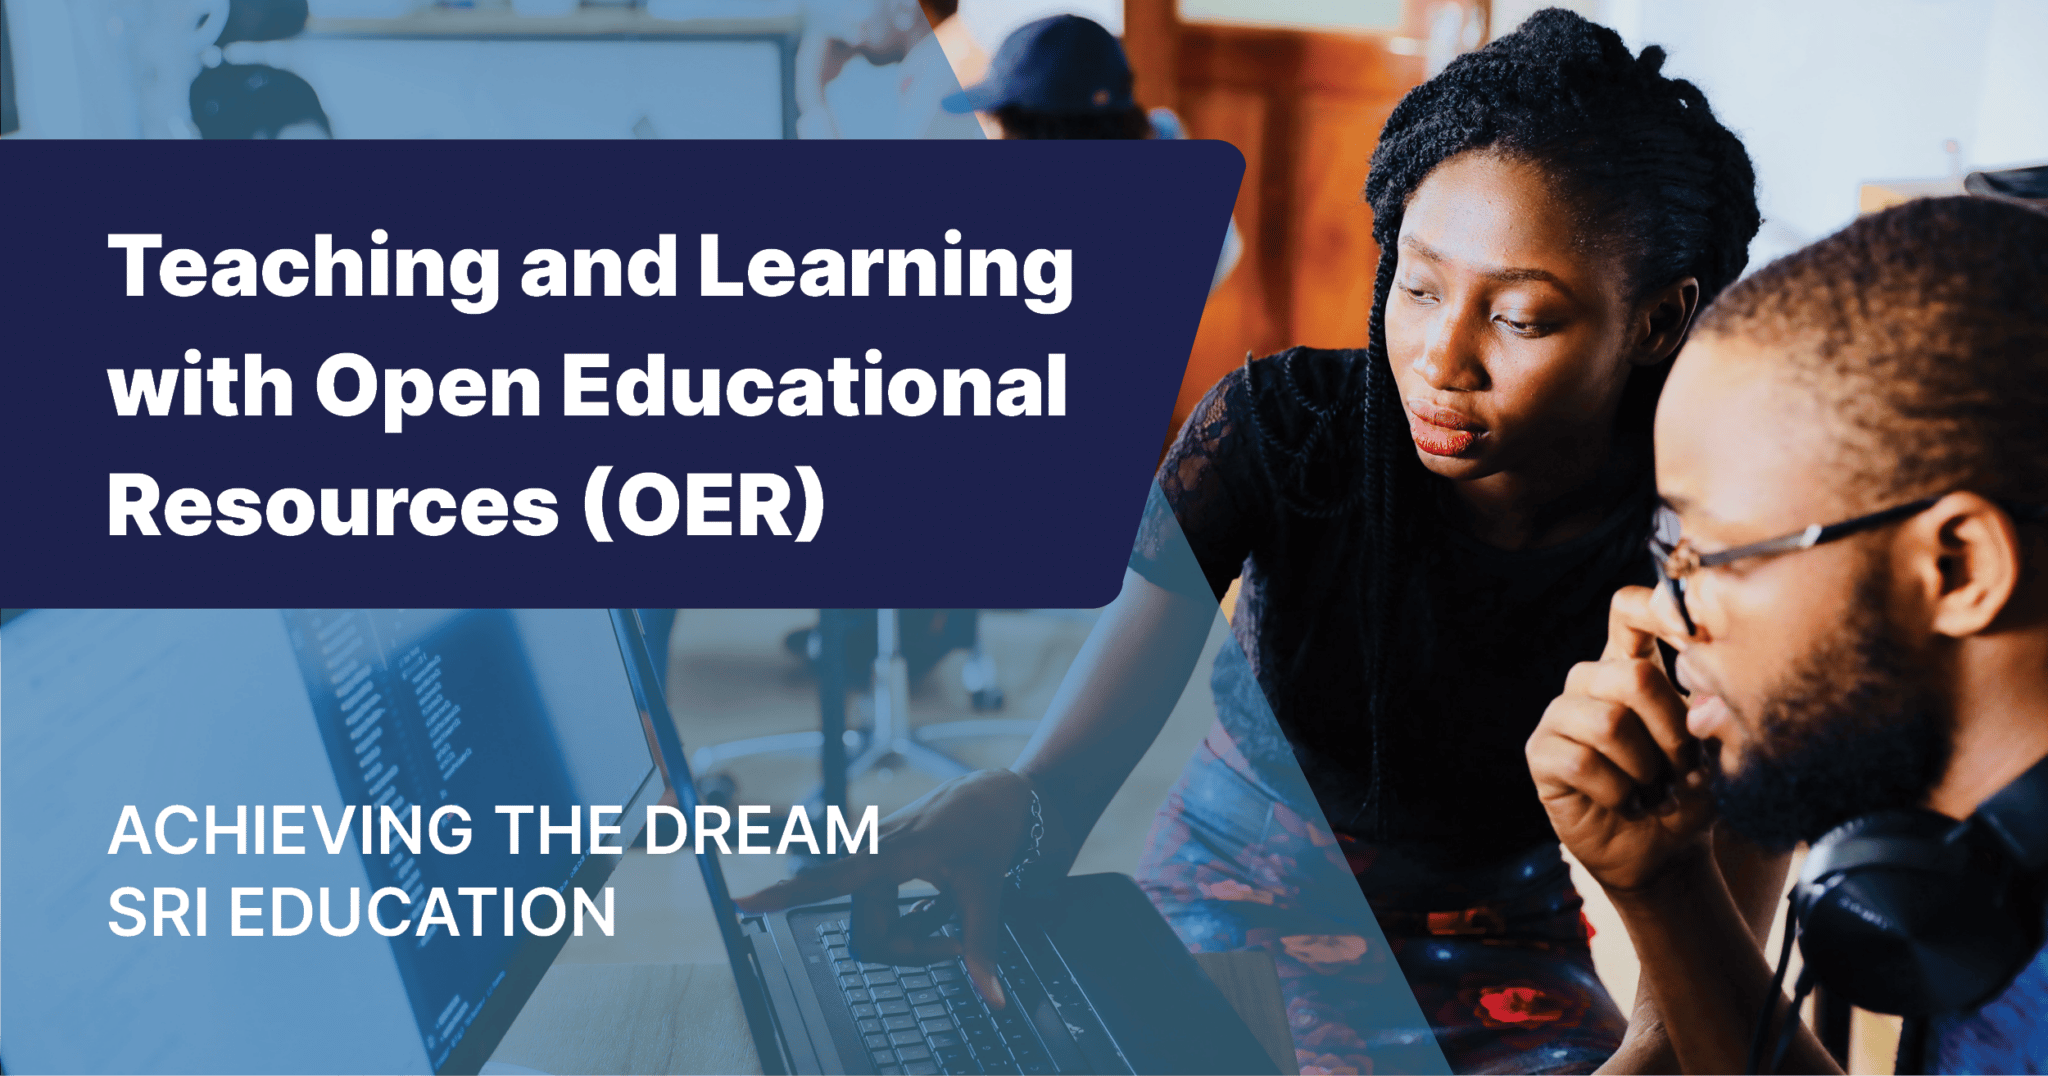 Achieving the Dream: Teaching and Learning with Open Educational Resources (OER)